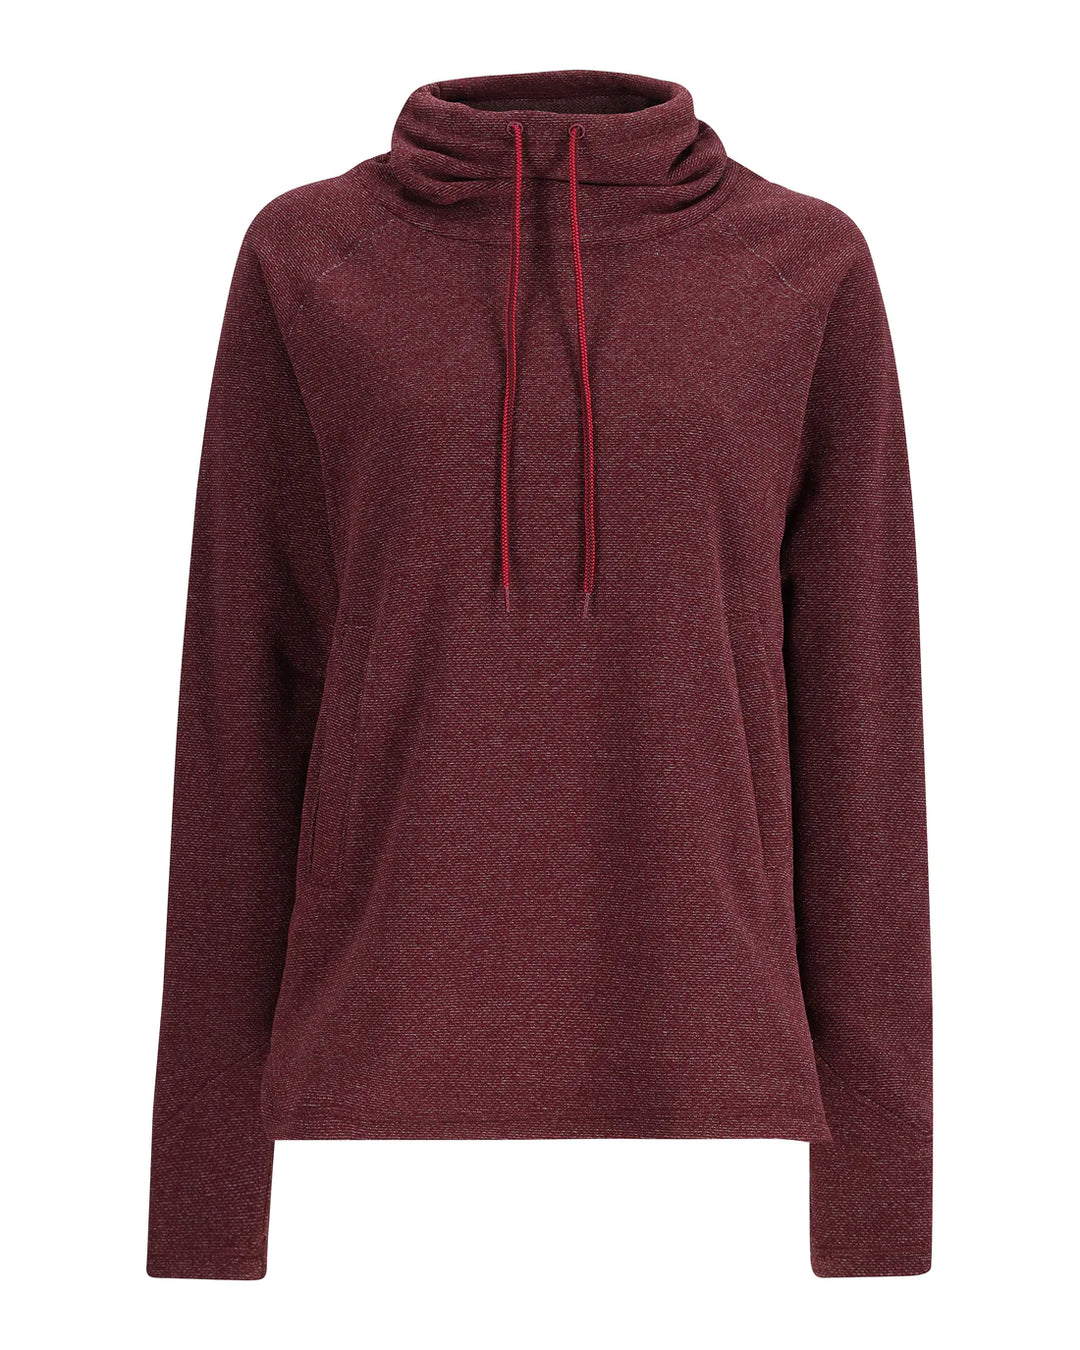 Simms - W's Rivershed Sweater - Mulberry Heather